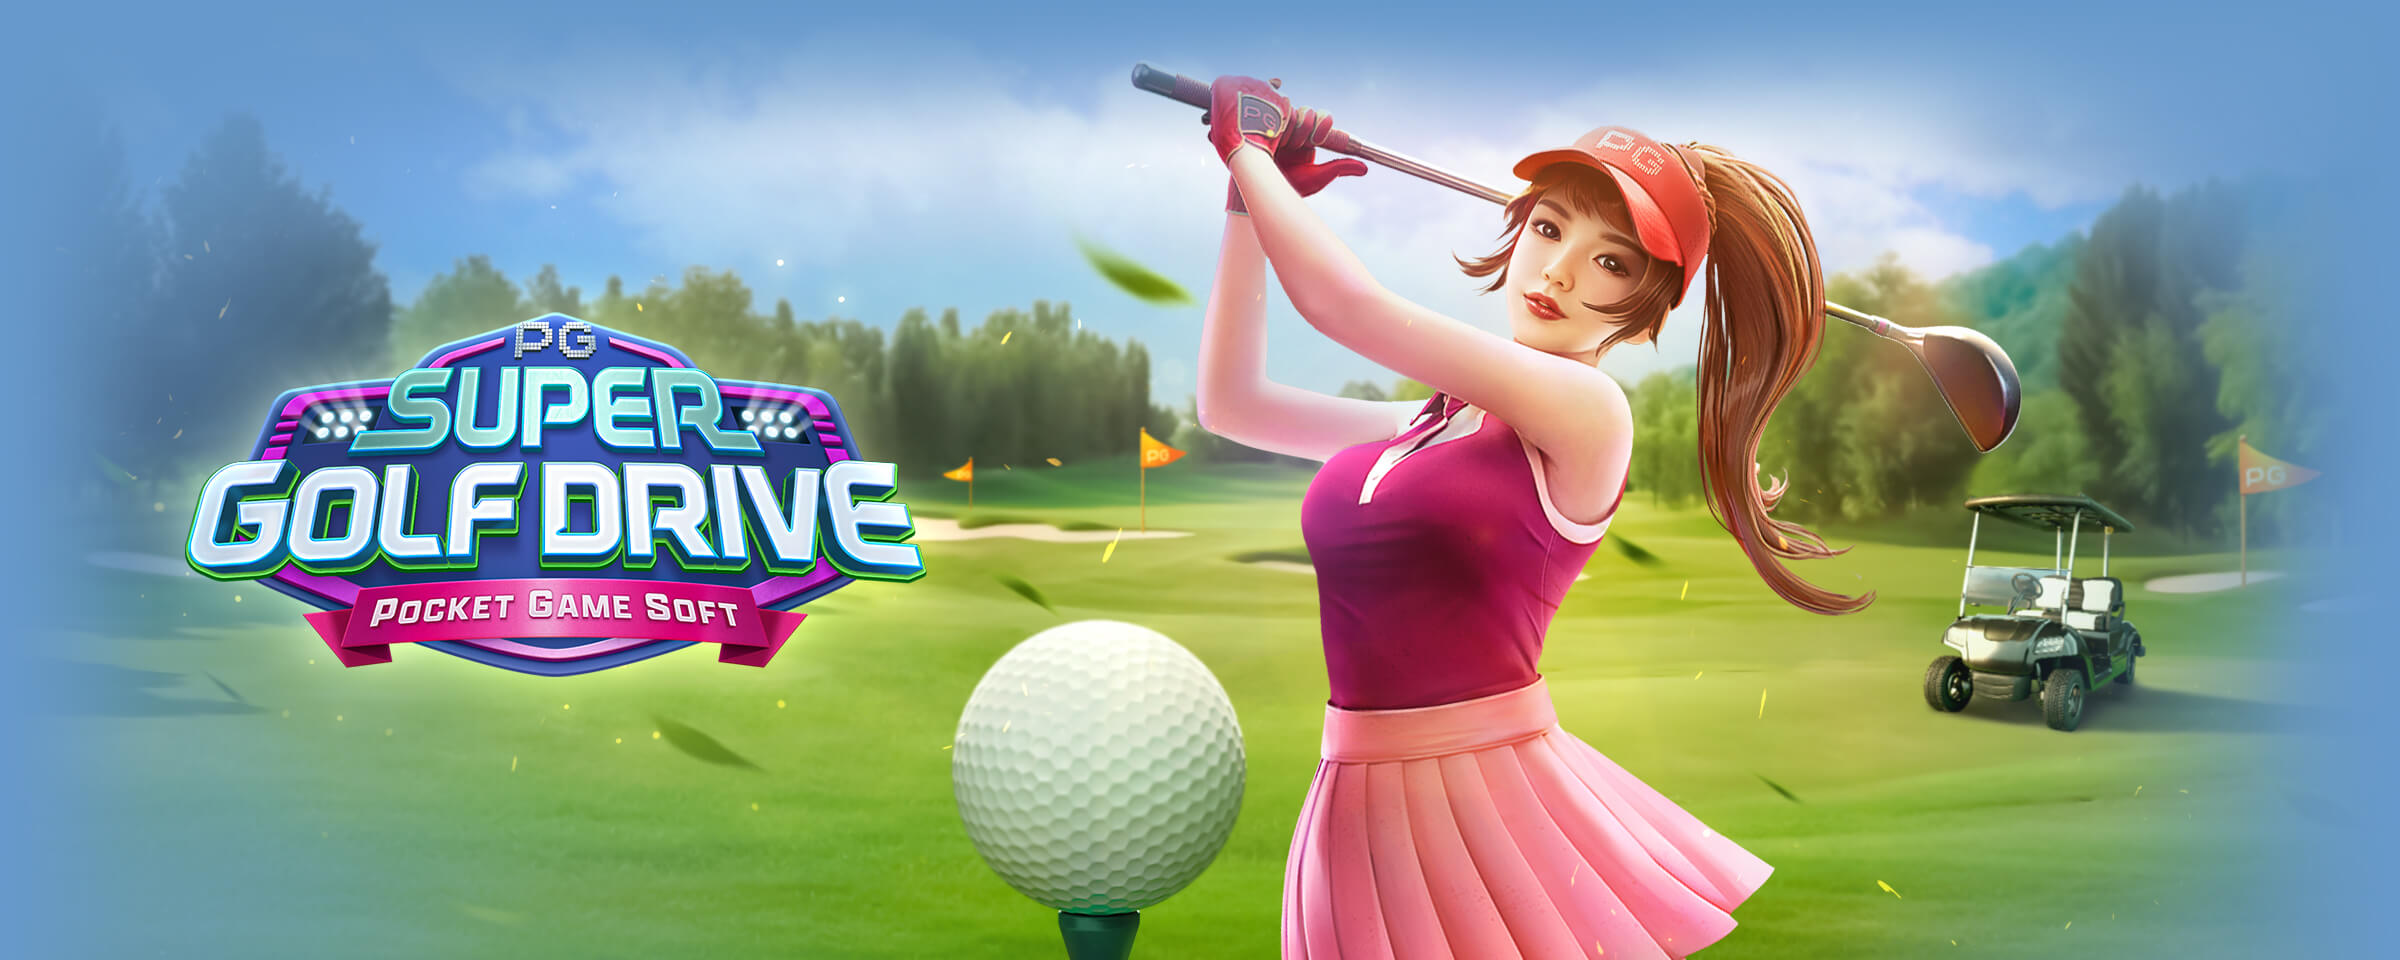 SHOW OFF YOUR GOLF SKILLS IN “SUPER GOLF DRIVE”!, Pocket Games Soft